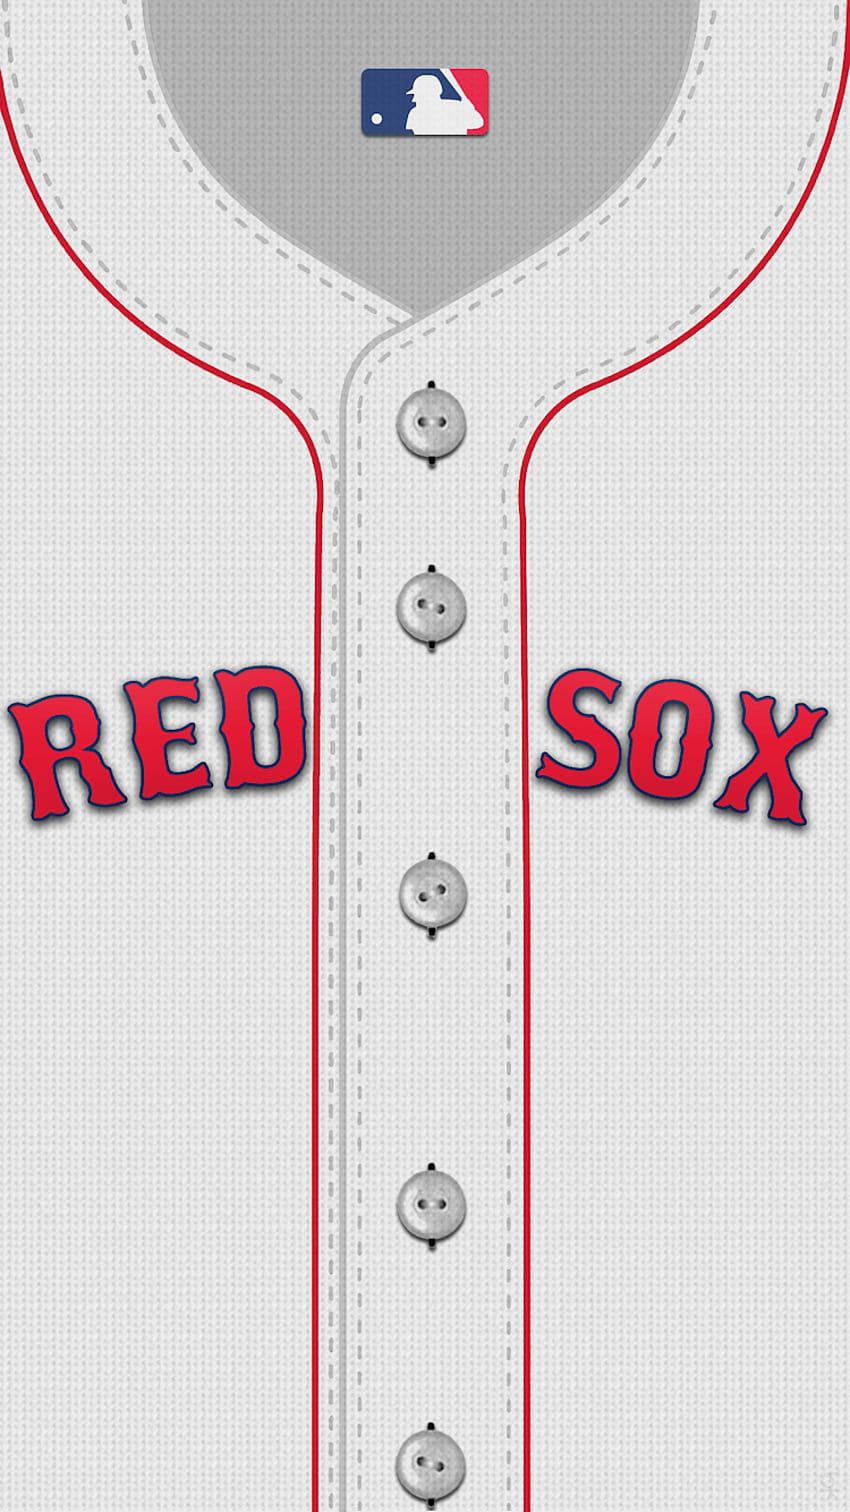 Boston Red Sox Home Png.579158 750×1,334 Pixels. Boston Red Soxs HD phone wallpaper